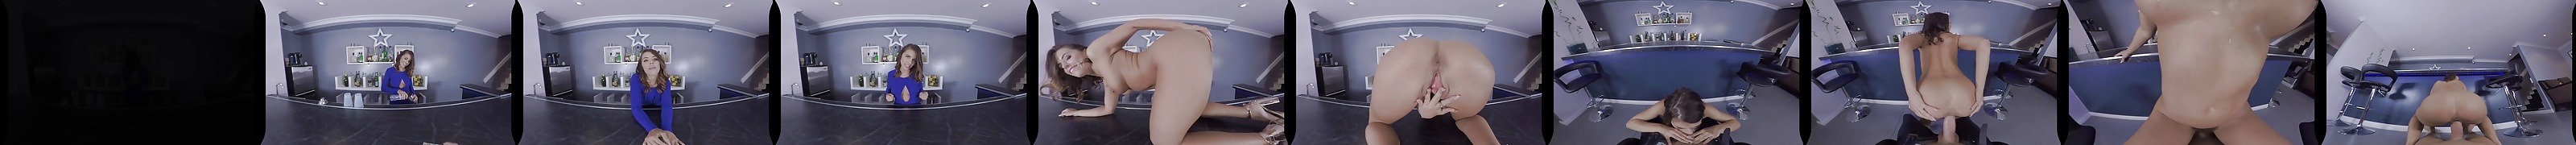 Pov Vr Porn Videos Sex From Your Point Of View Xhamster